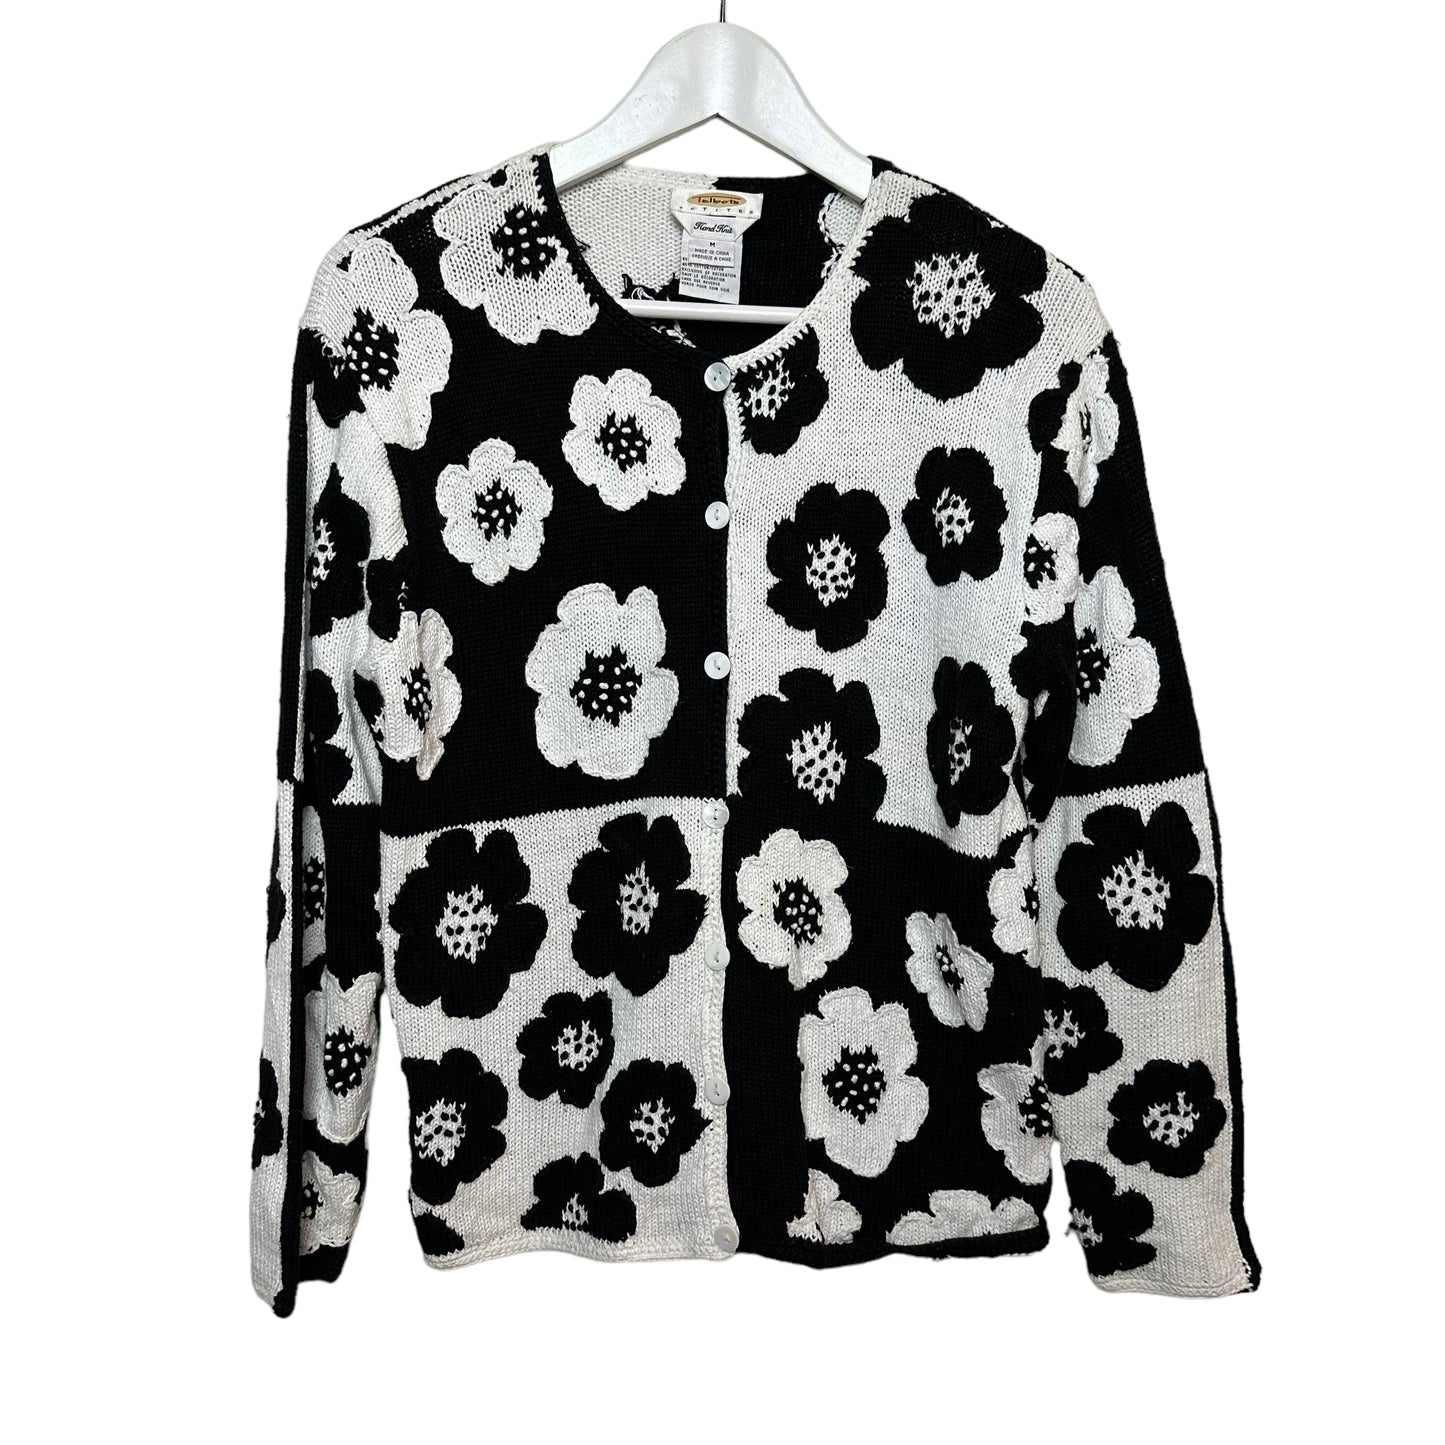 Vintage 90s Talbots Black and White Floral Color Block Cardigan Sweater Hand Knit Medium